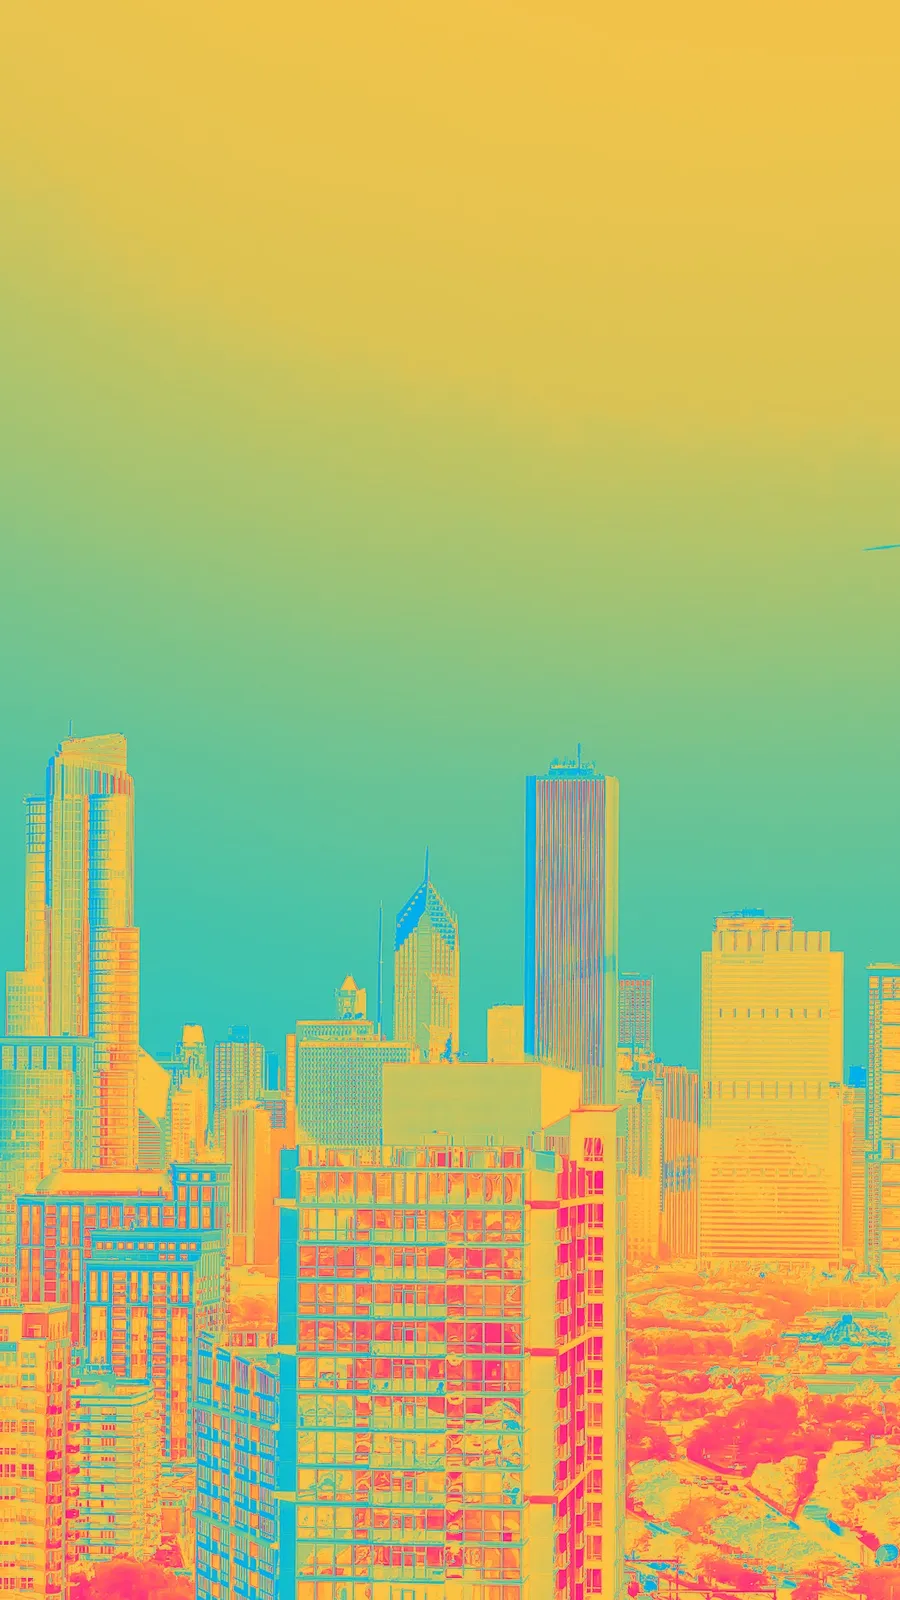 City colors zoom-backgrounds template